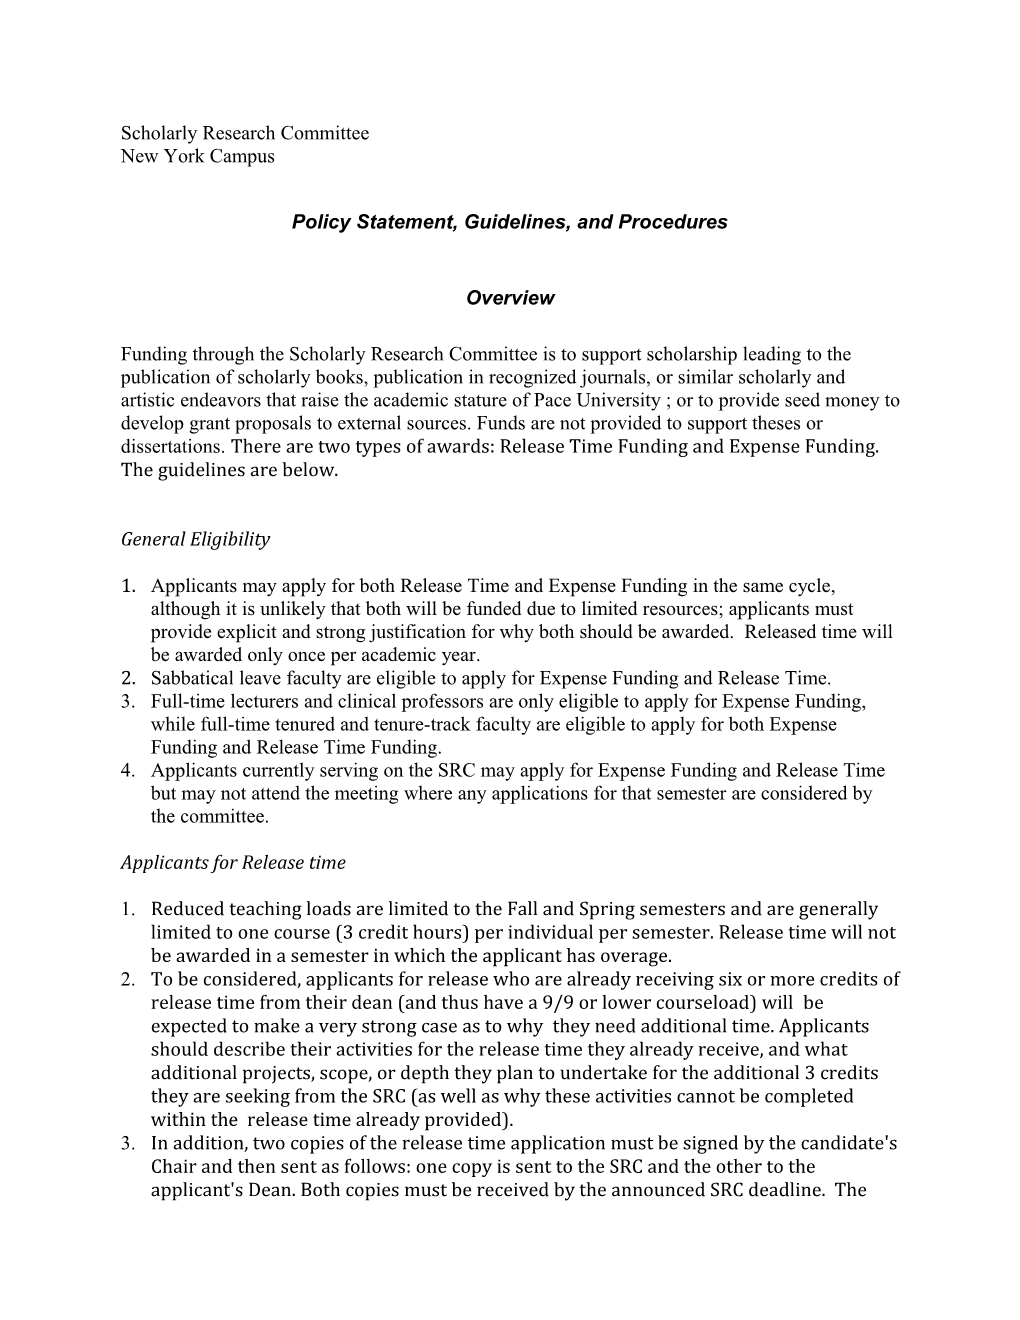 Policy Statement, Guidelines, and Procedures